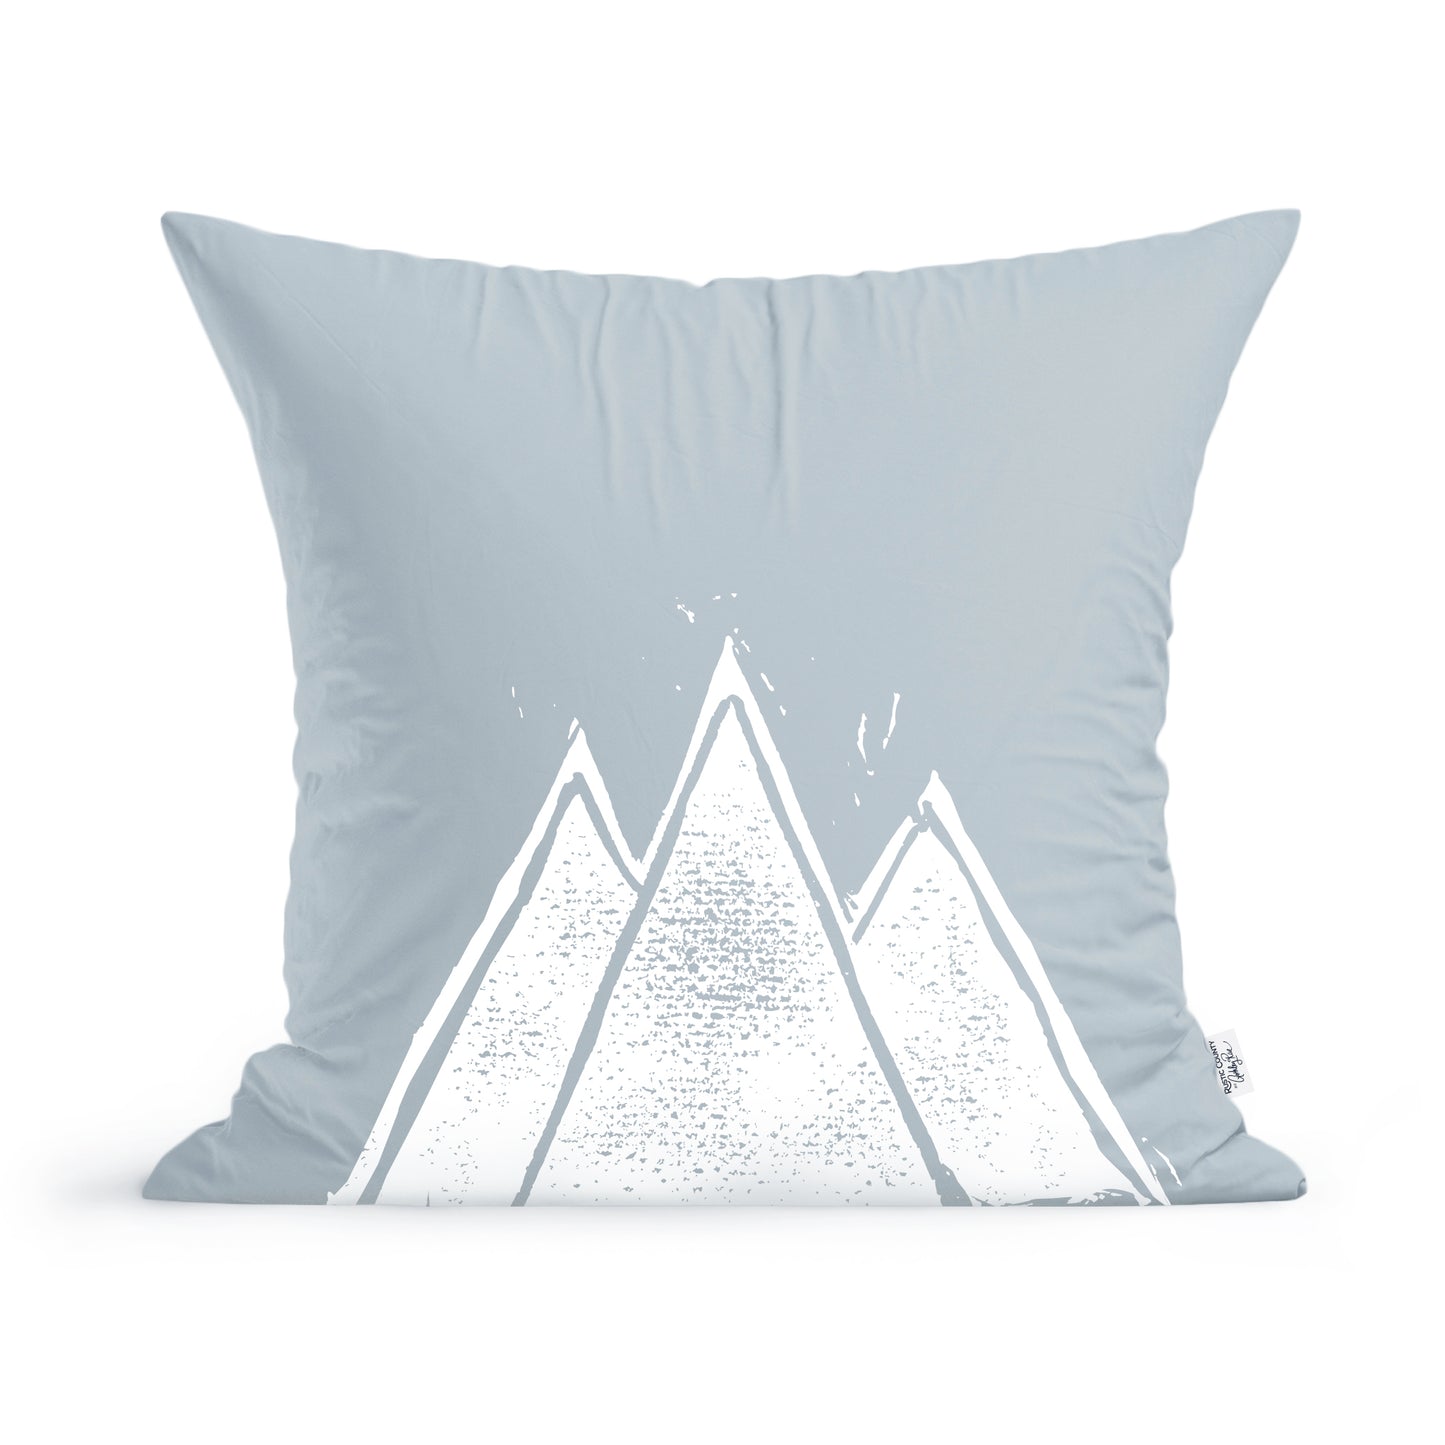 A light blue Rustic County Maine Mountain Peaks Pillow featuring a simplistic white mountain design with a speckled texture, set against a plain background.